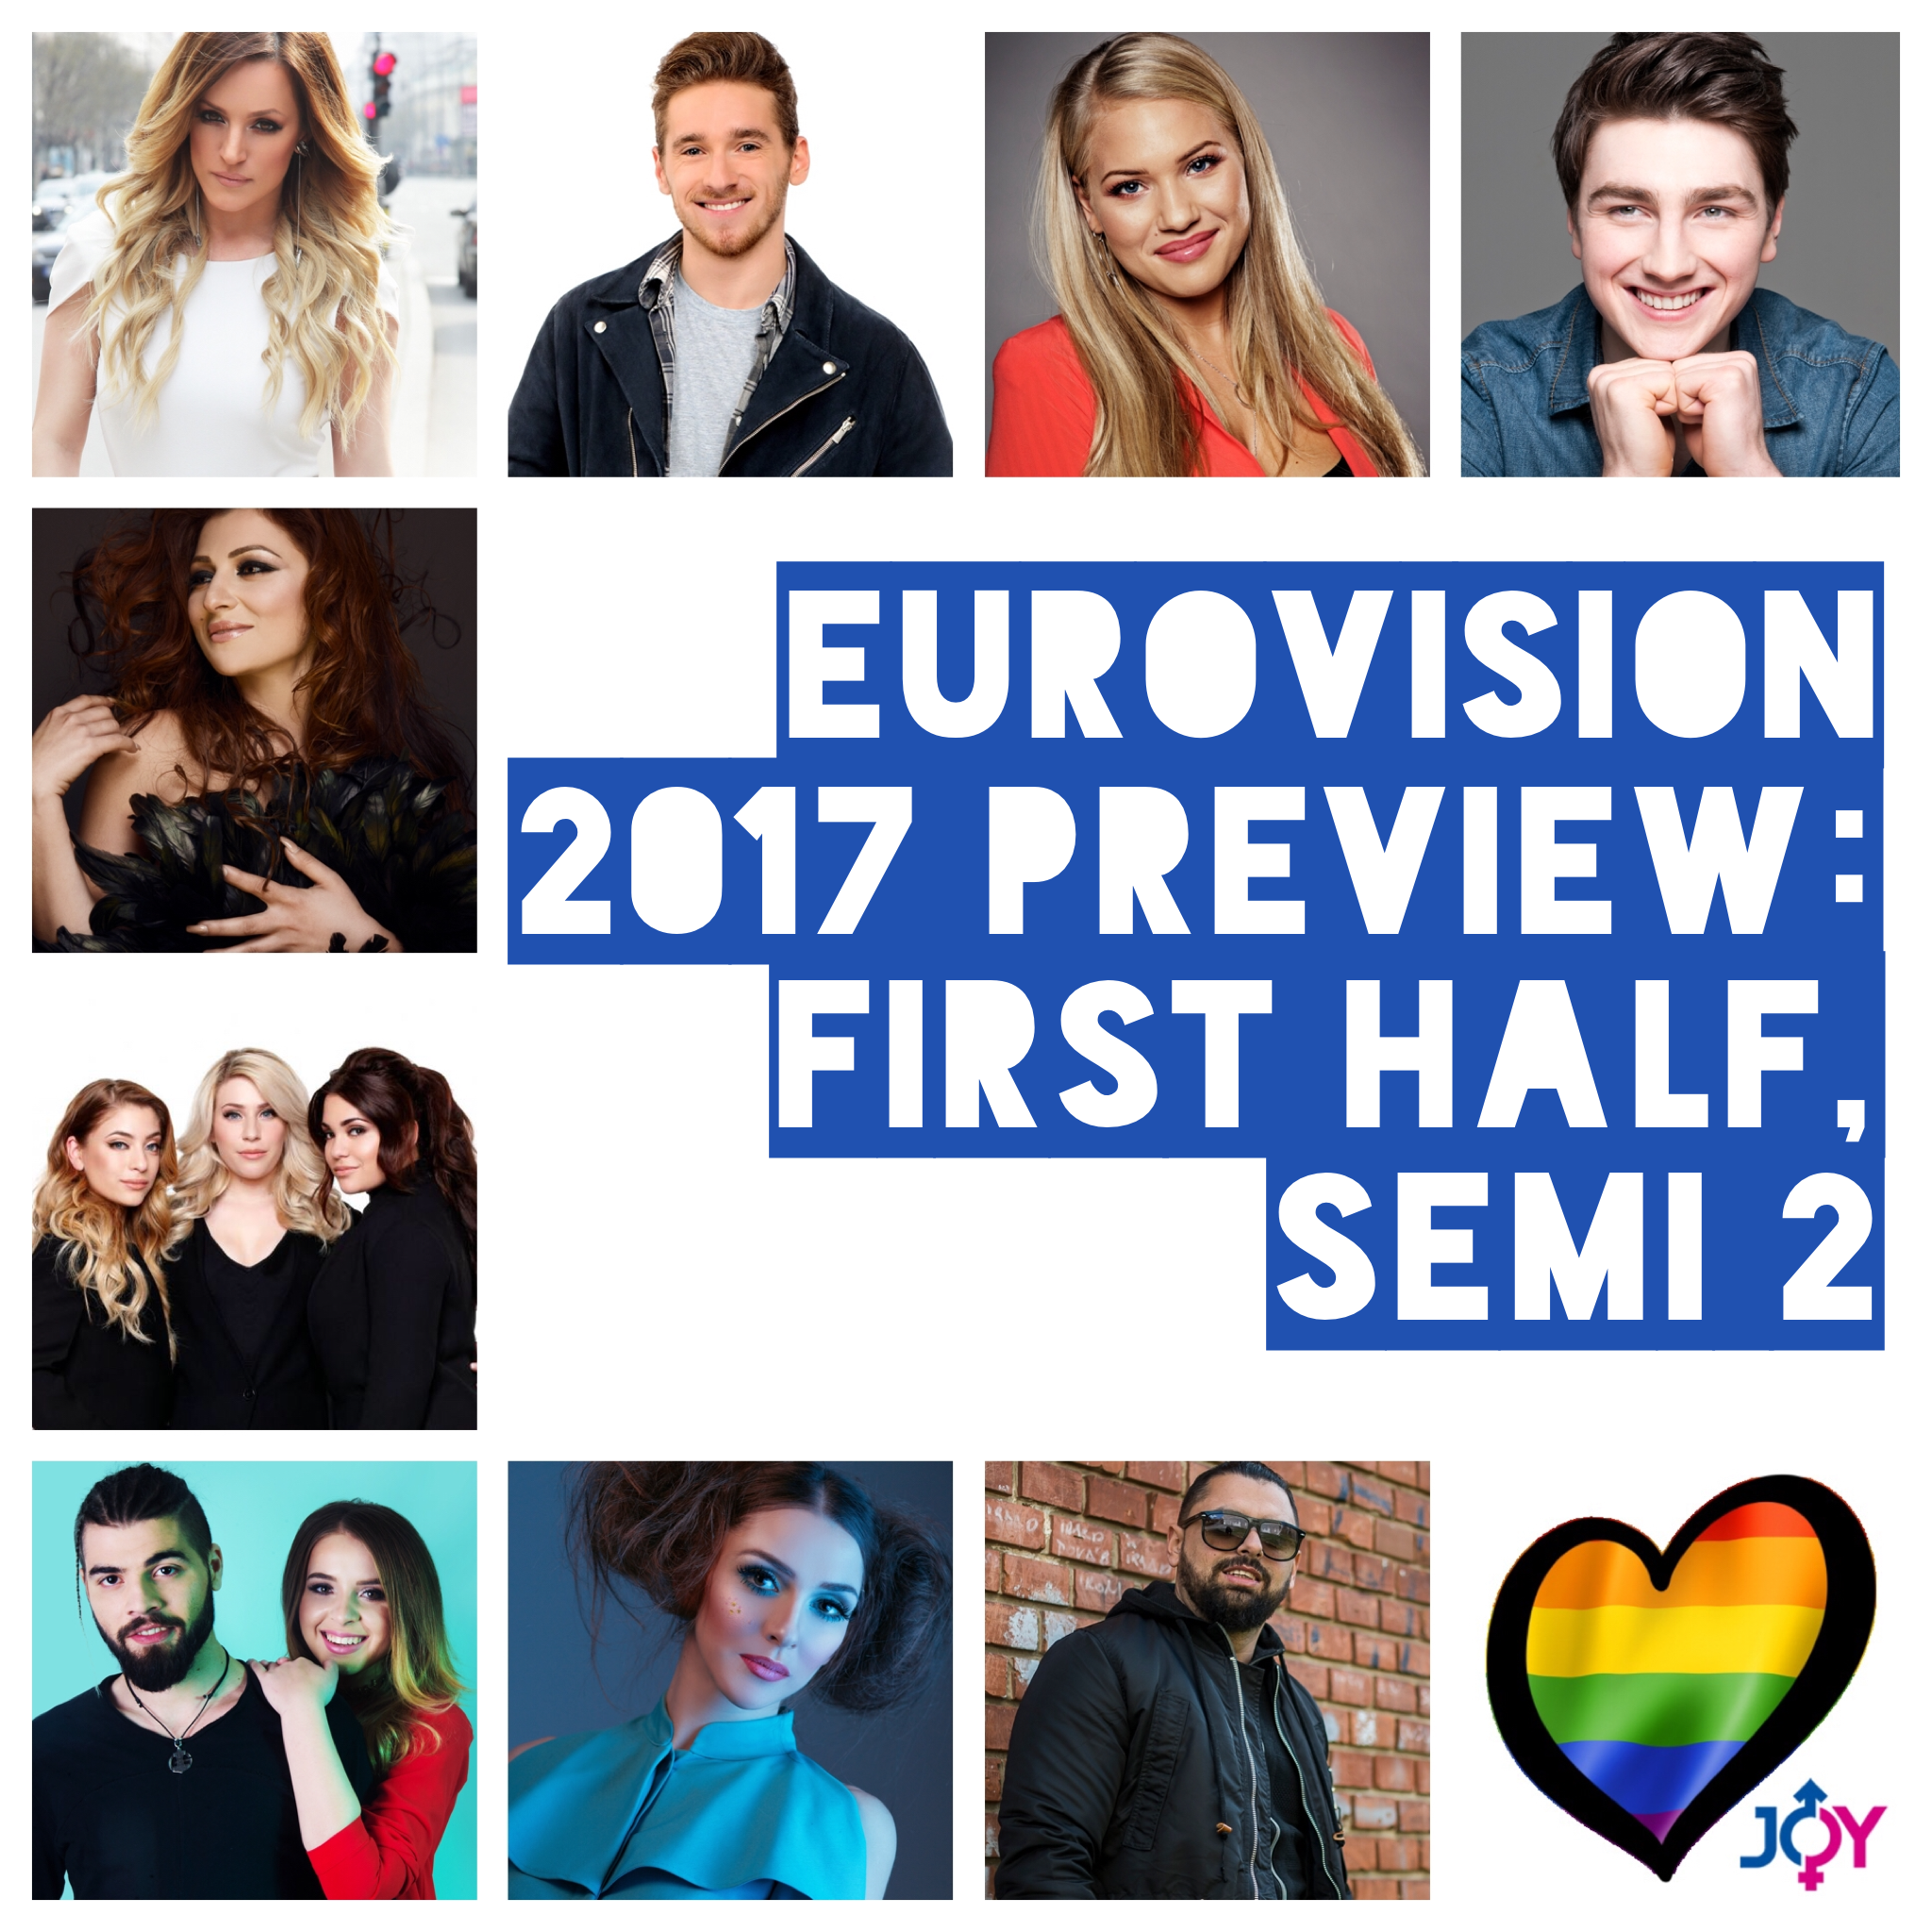 Dance, Yodel & Run Wherever You Are: Eurovision 2017 Preview – First Half of Semi 2